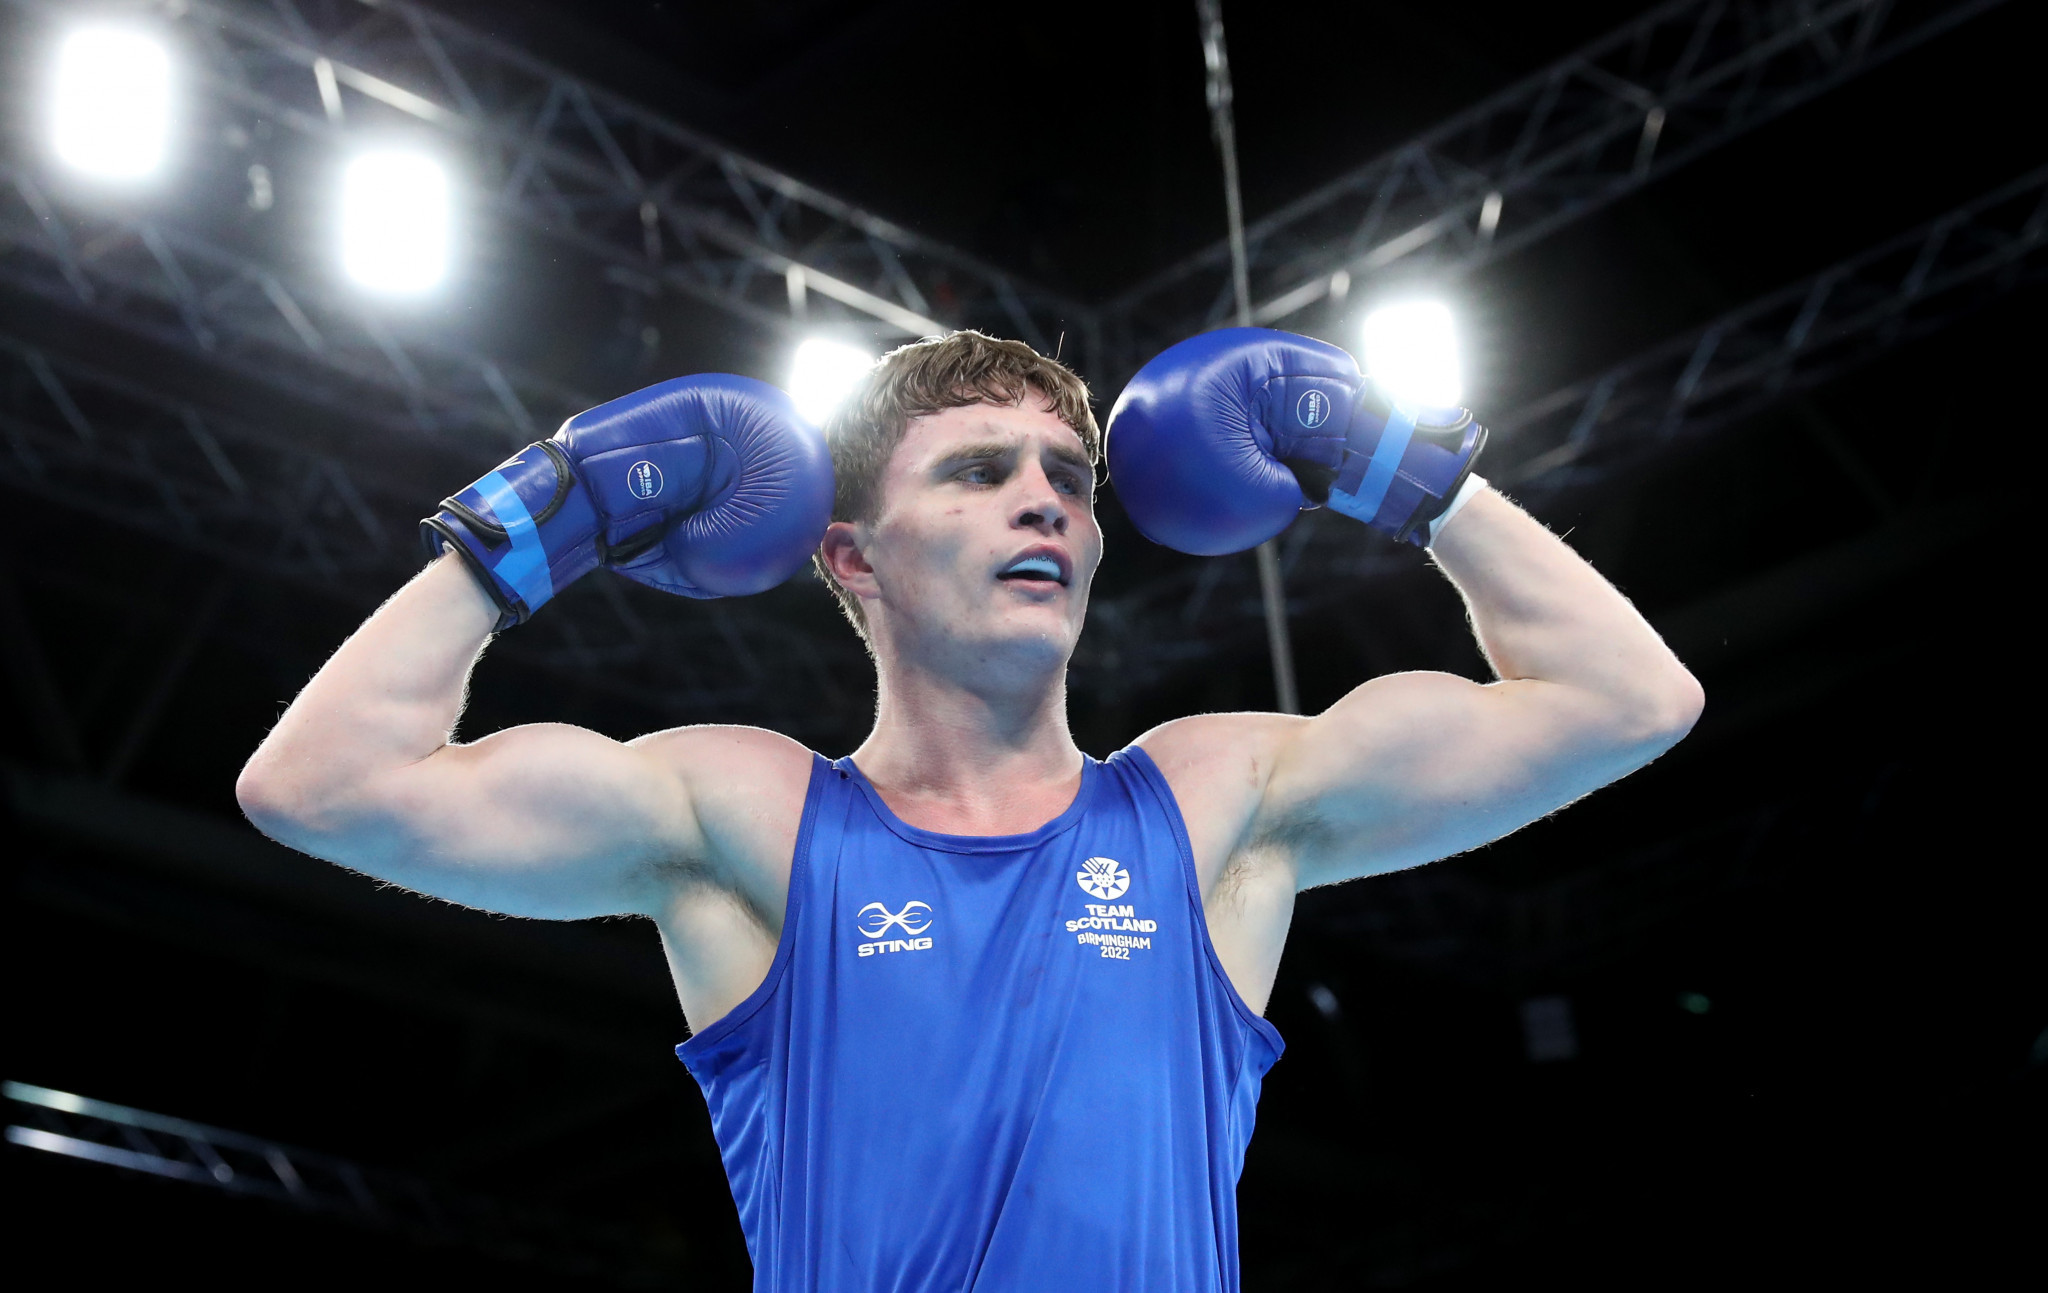 Scotland won three titles at the Birmingham 2022 Commonwealth Games in boxing ©Getty Images